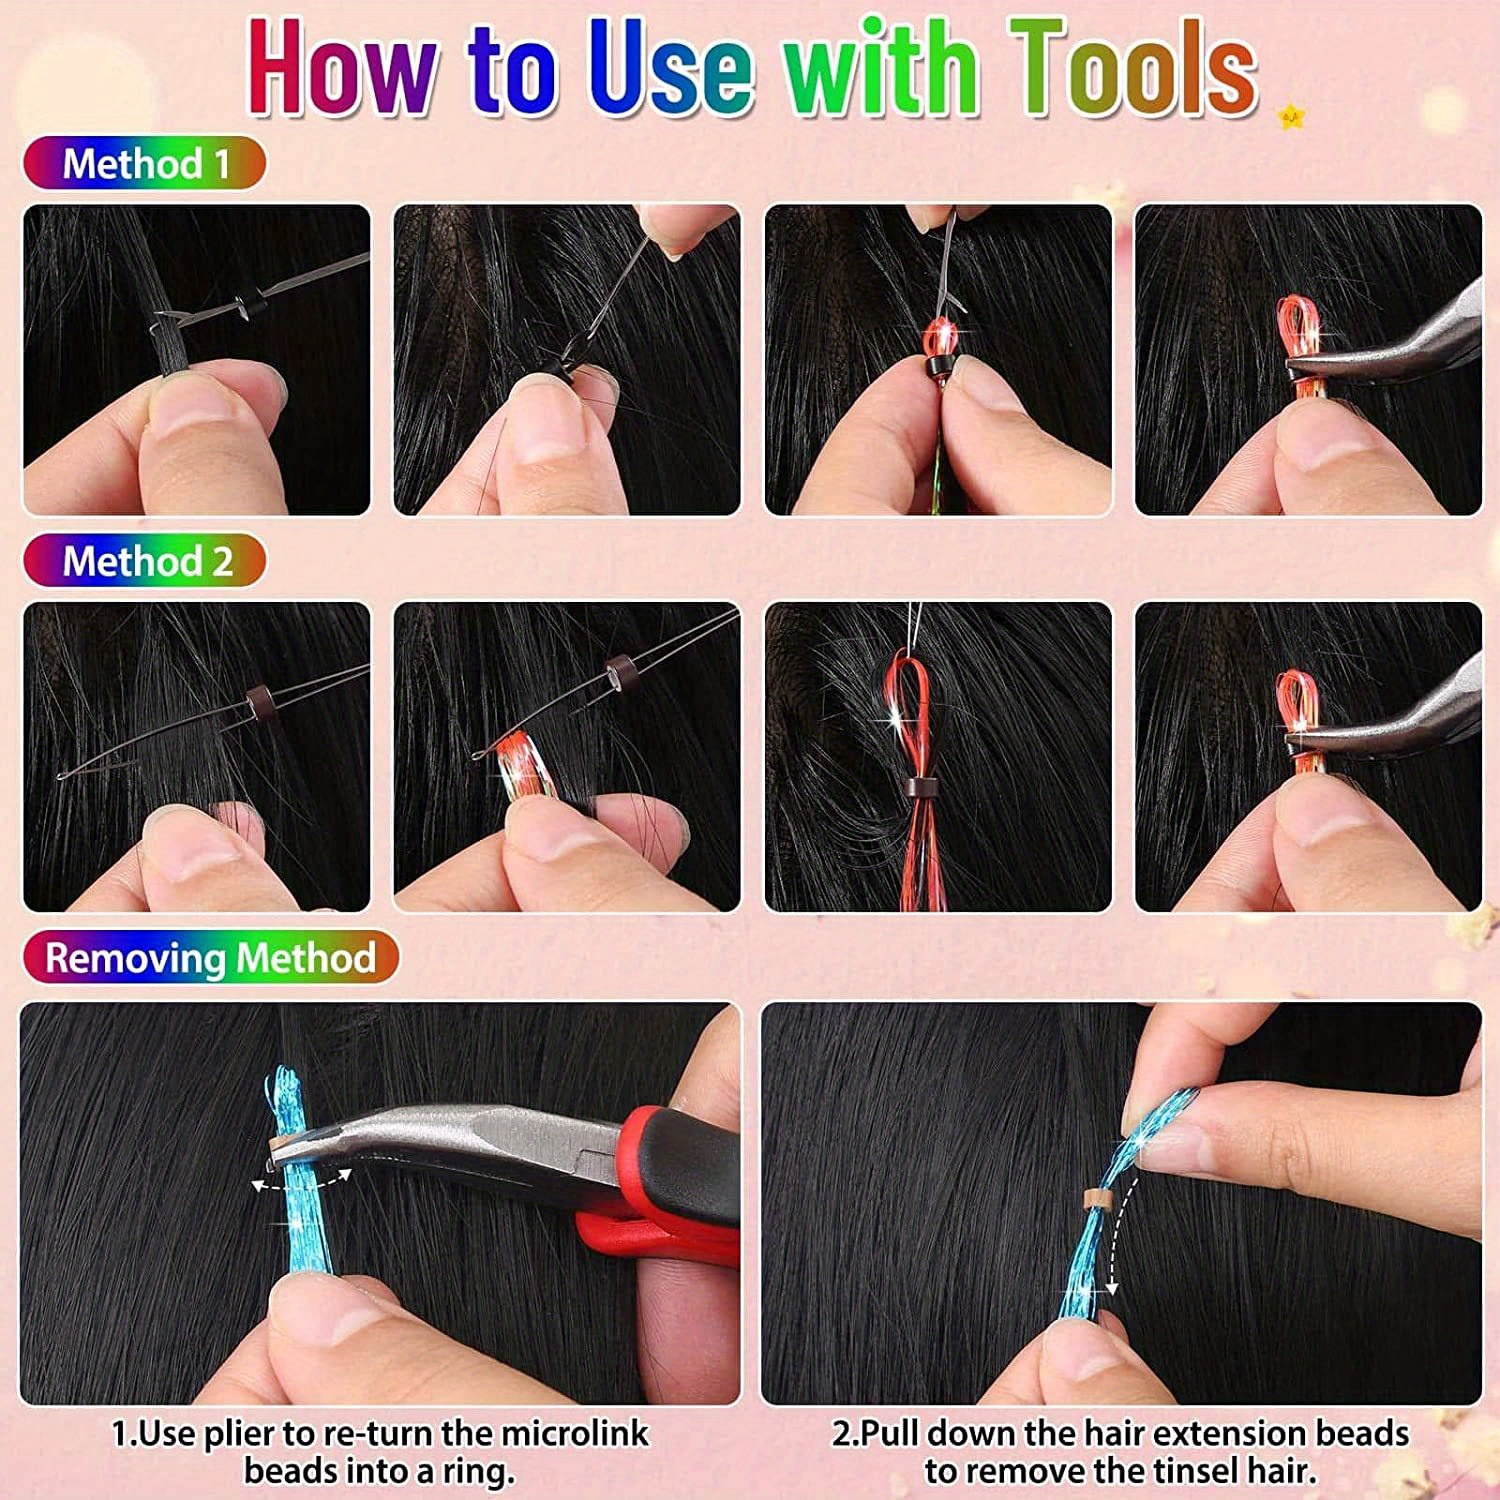 Hair Tinsel Extensions: 3 Creative Ways to Install and Remove #hairtinsel 